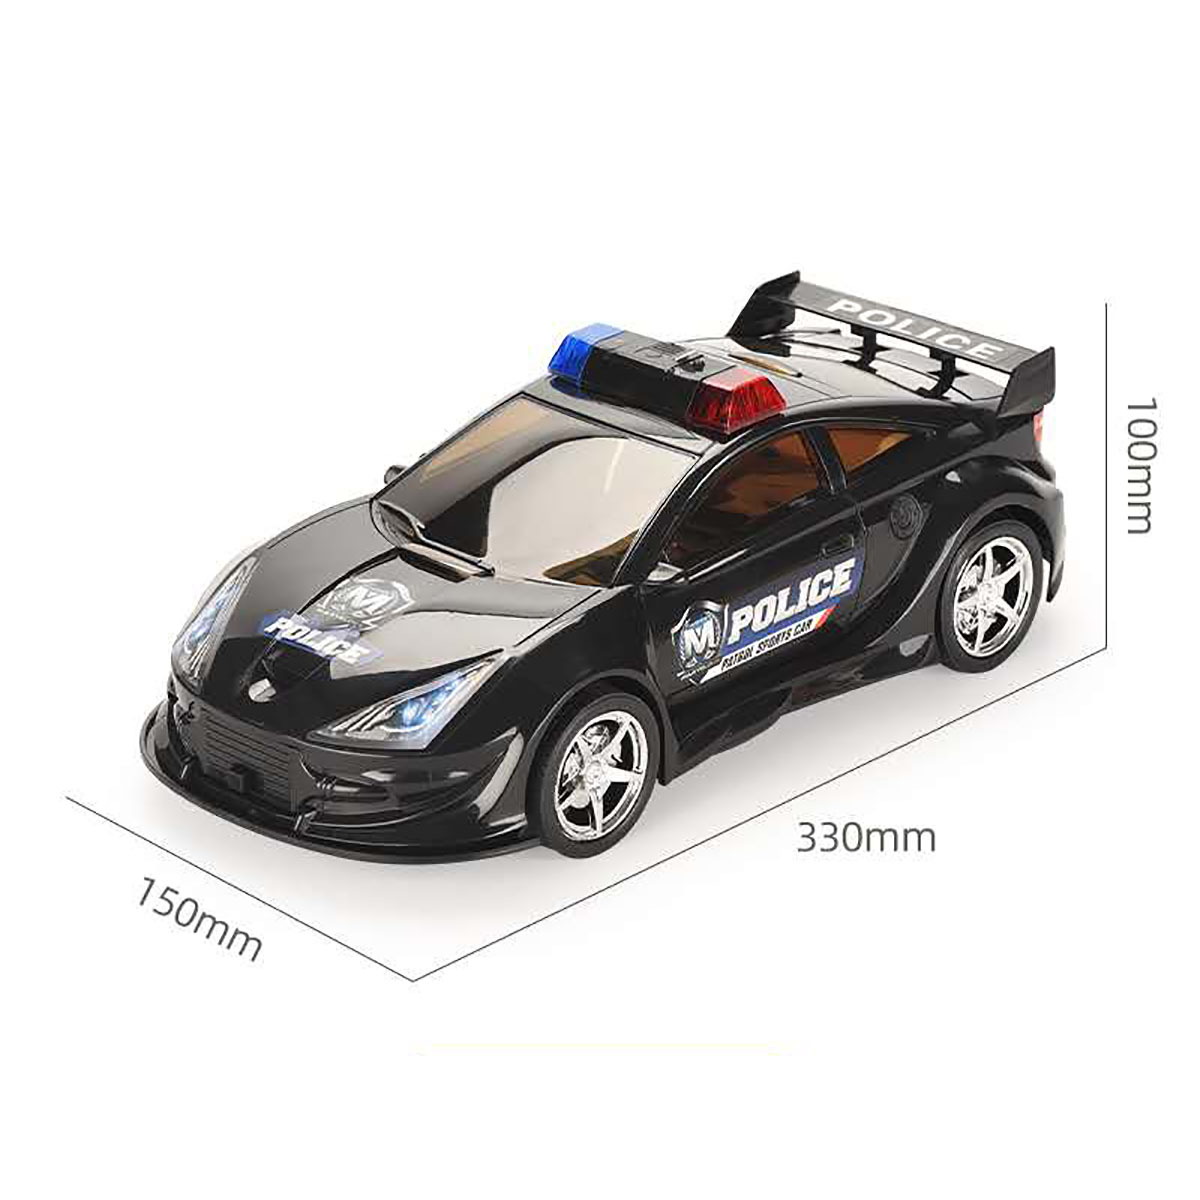 Simulation-Police-Car-Diecast-Vehicle-Model-Toy-with-Sirnes-Sound-and-Light-with-6-Cars-and-Game-Map-1805965-10